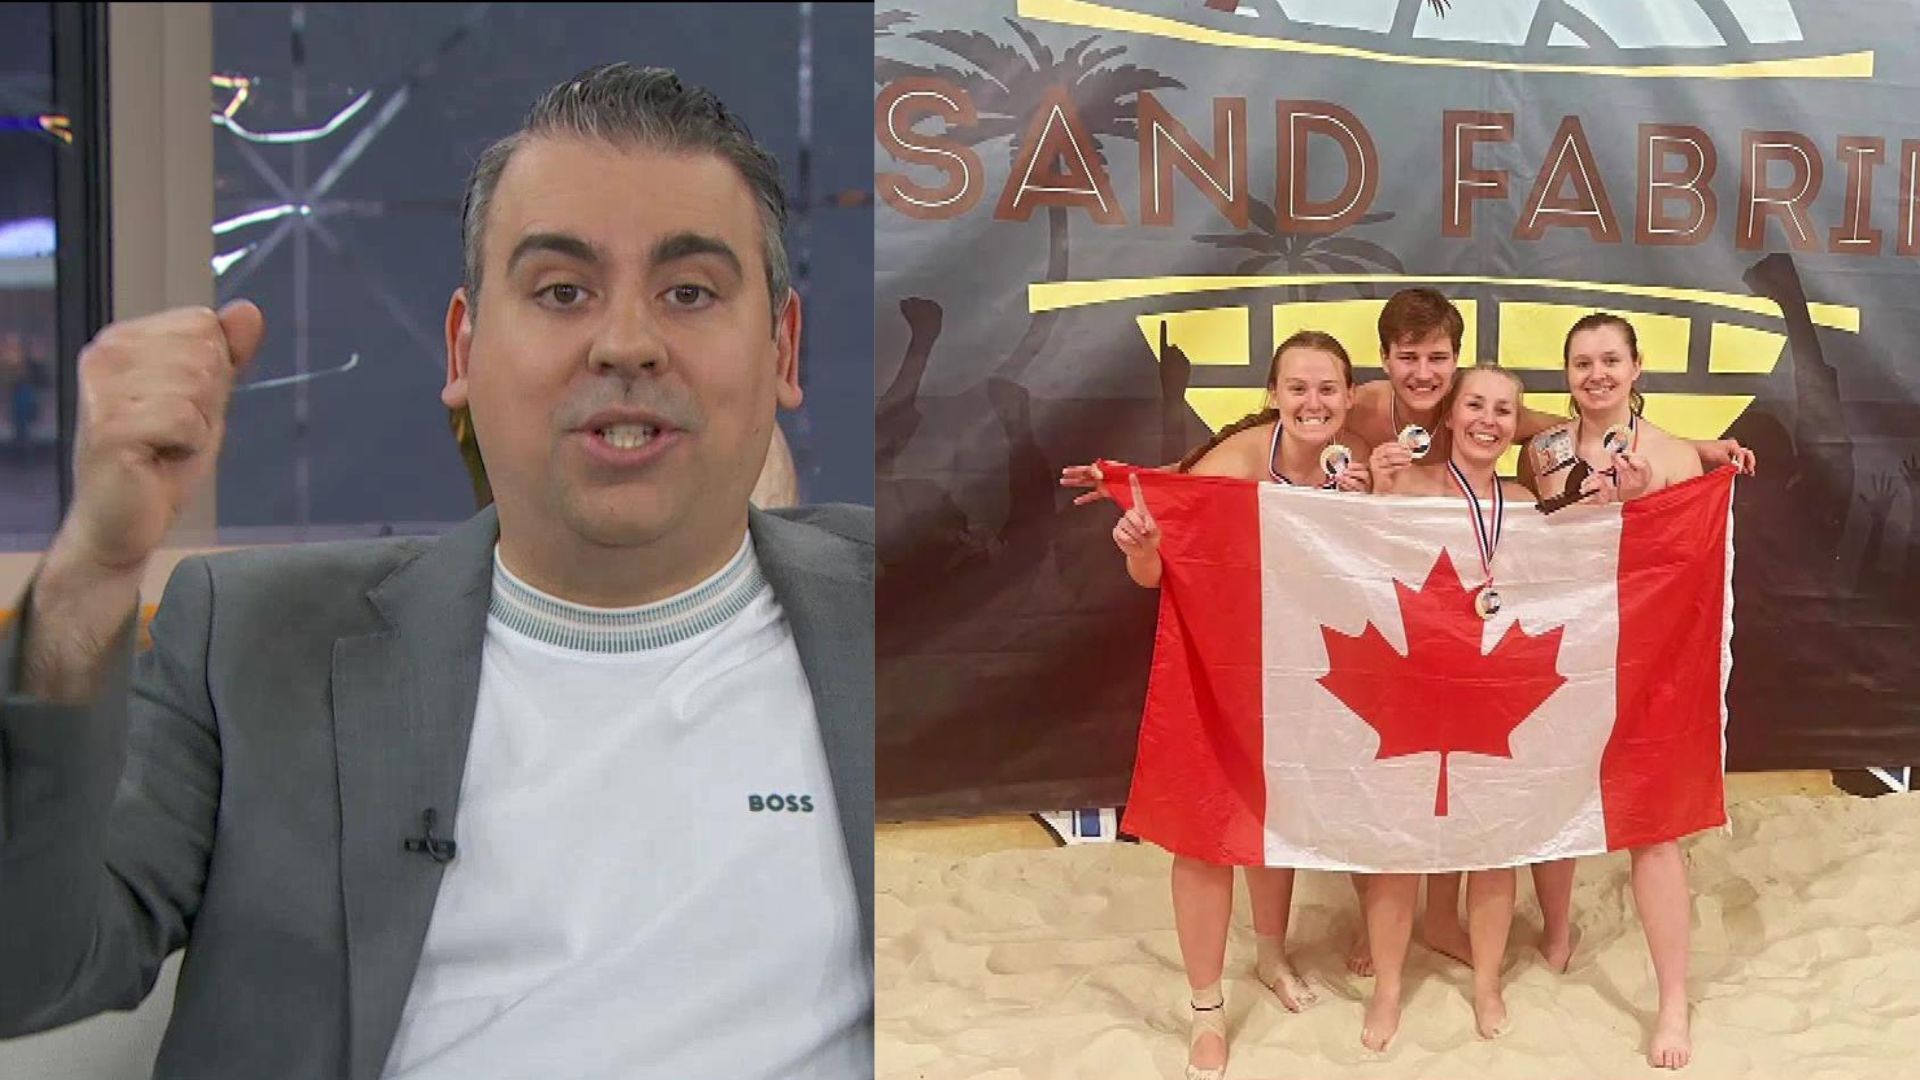 These Canadians win GOLD (and bare it all) at a nude volleyball tournament